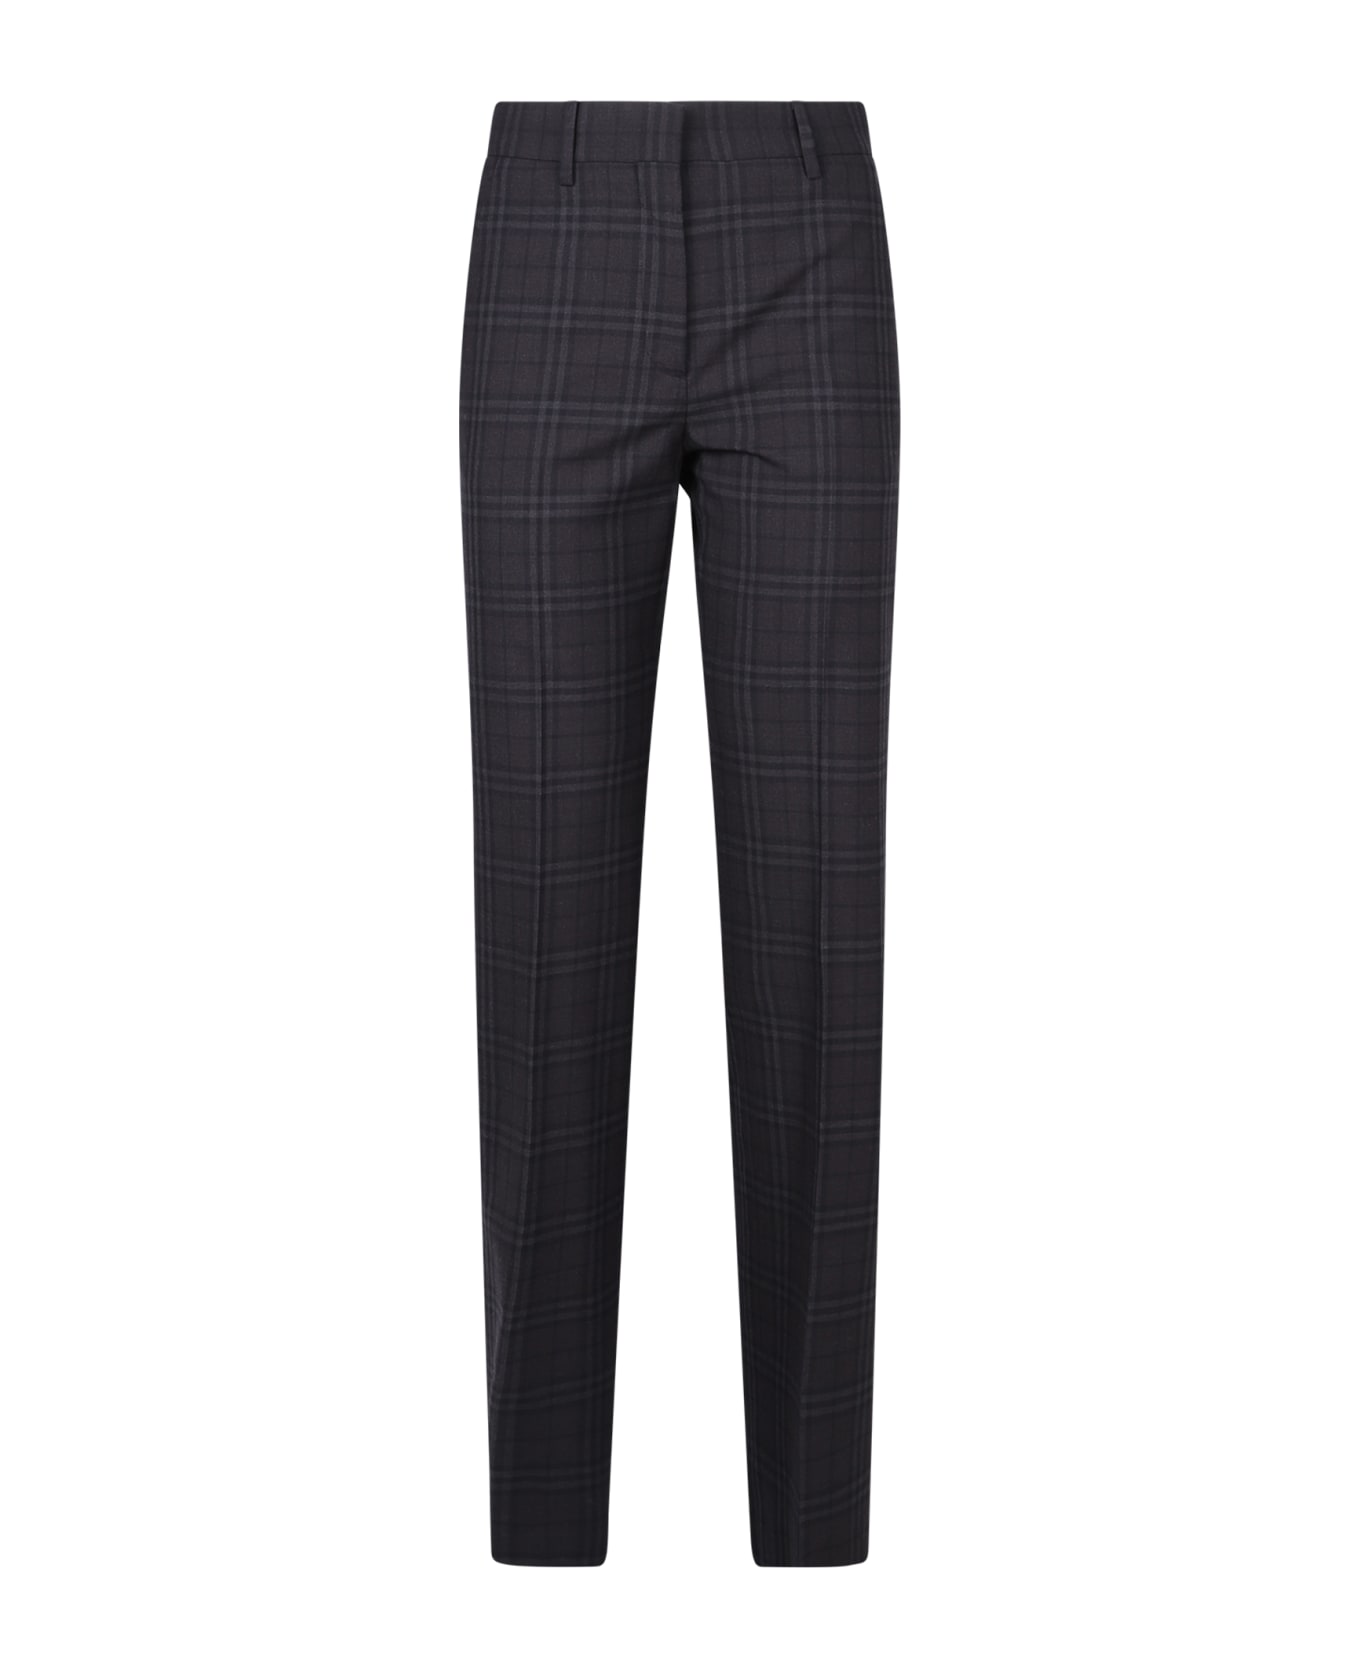 Burberry Slim Fit Trousers - Grey ボトムス